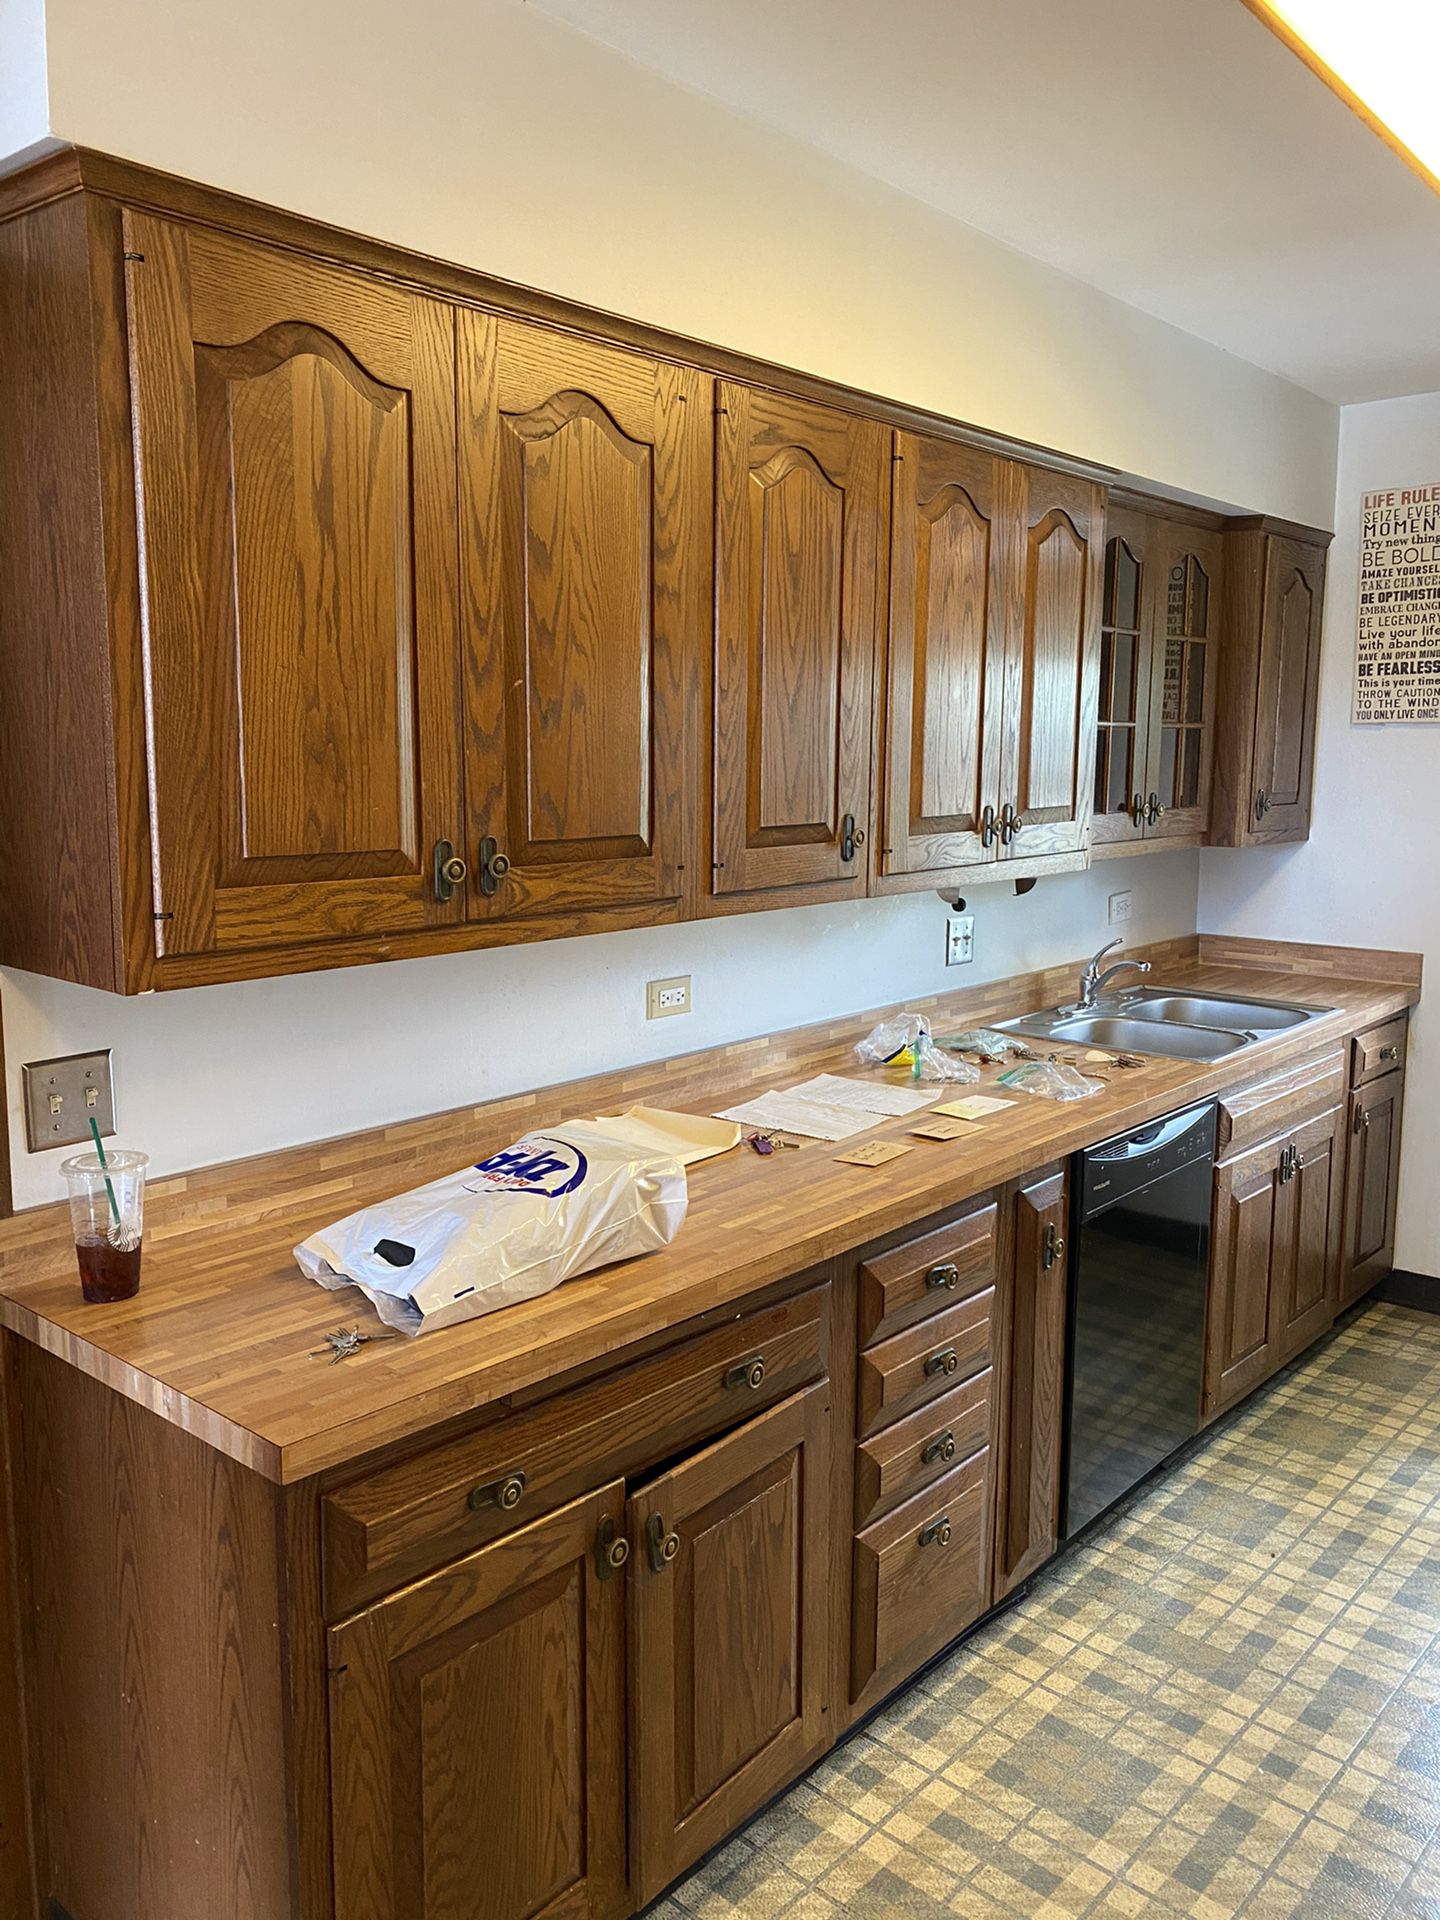 Wooden kitchen cabinets with sink and faucet